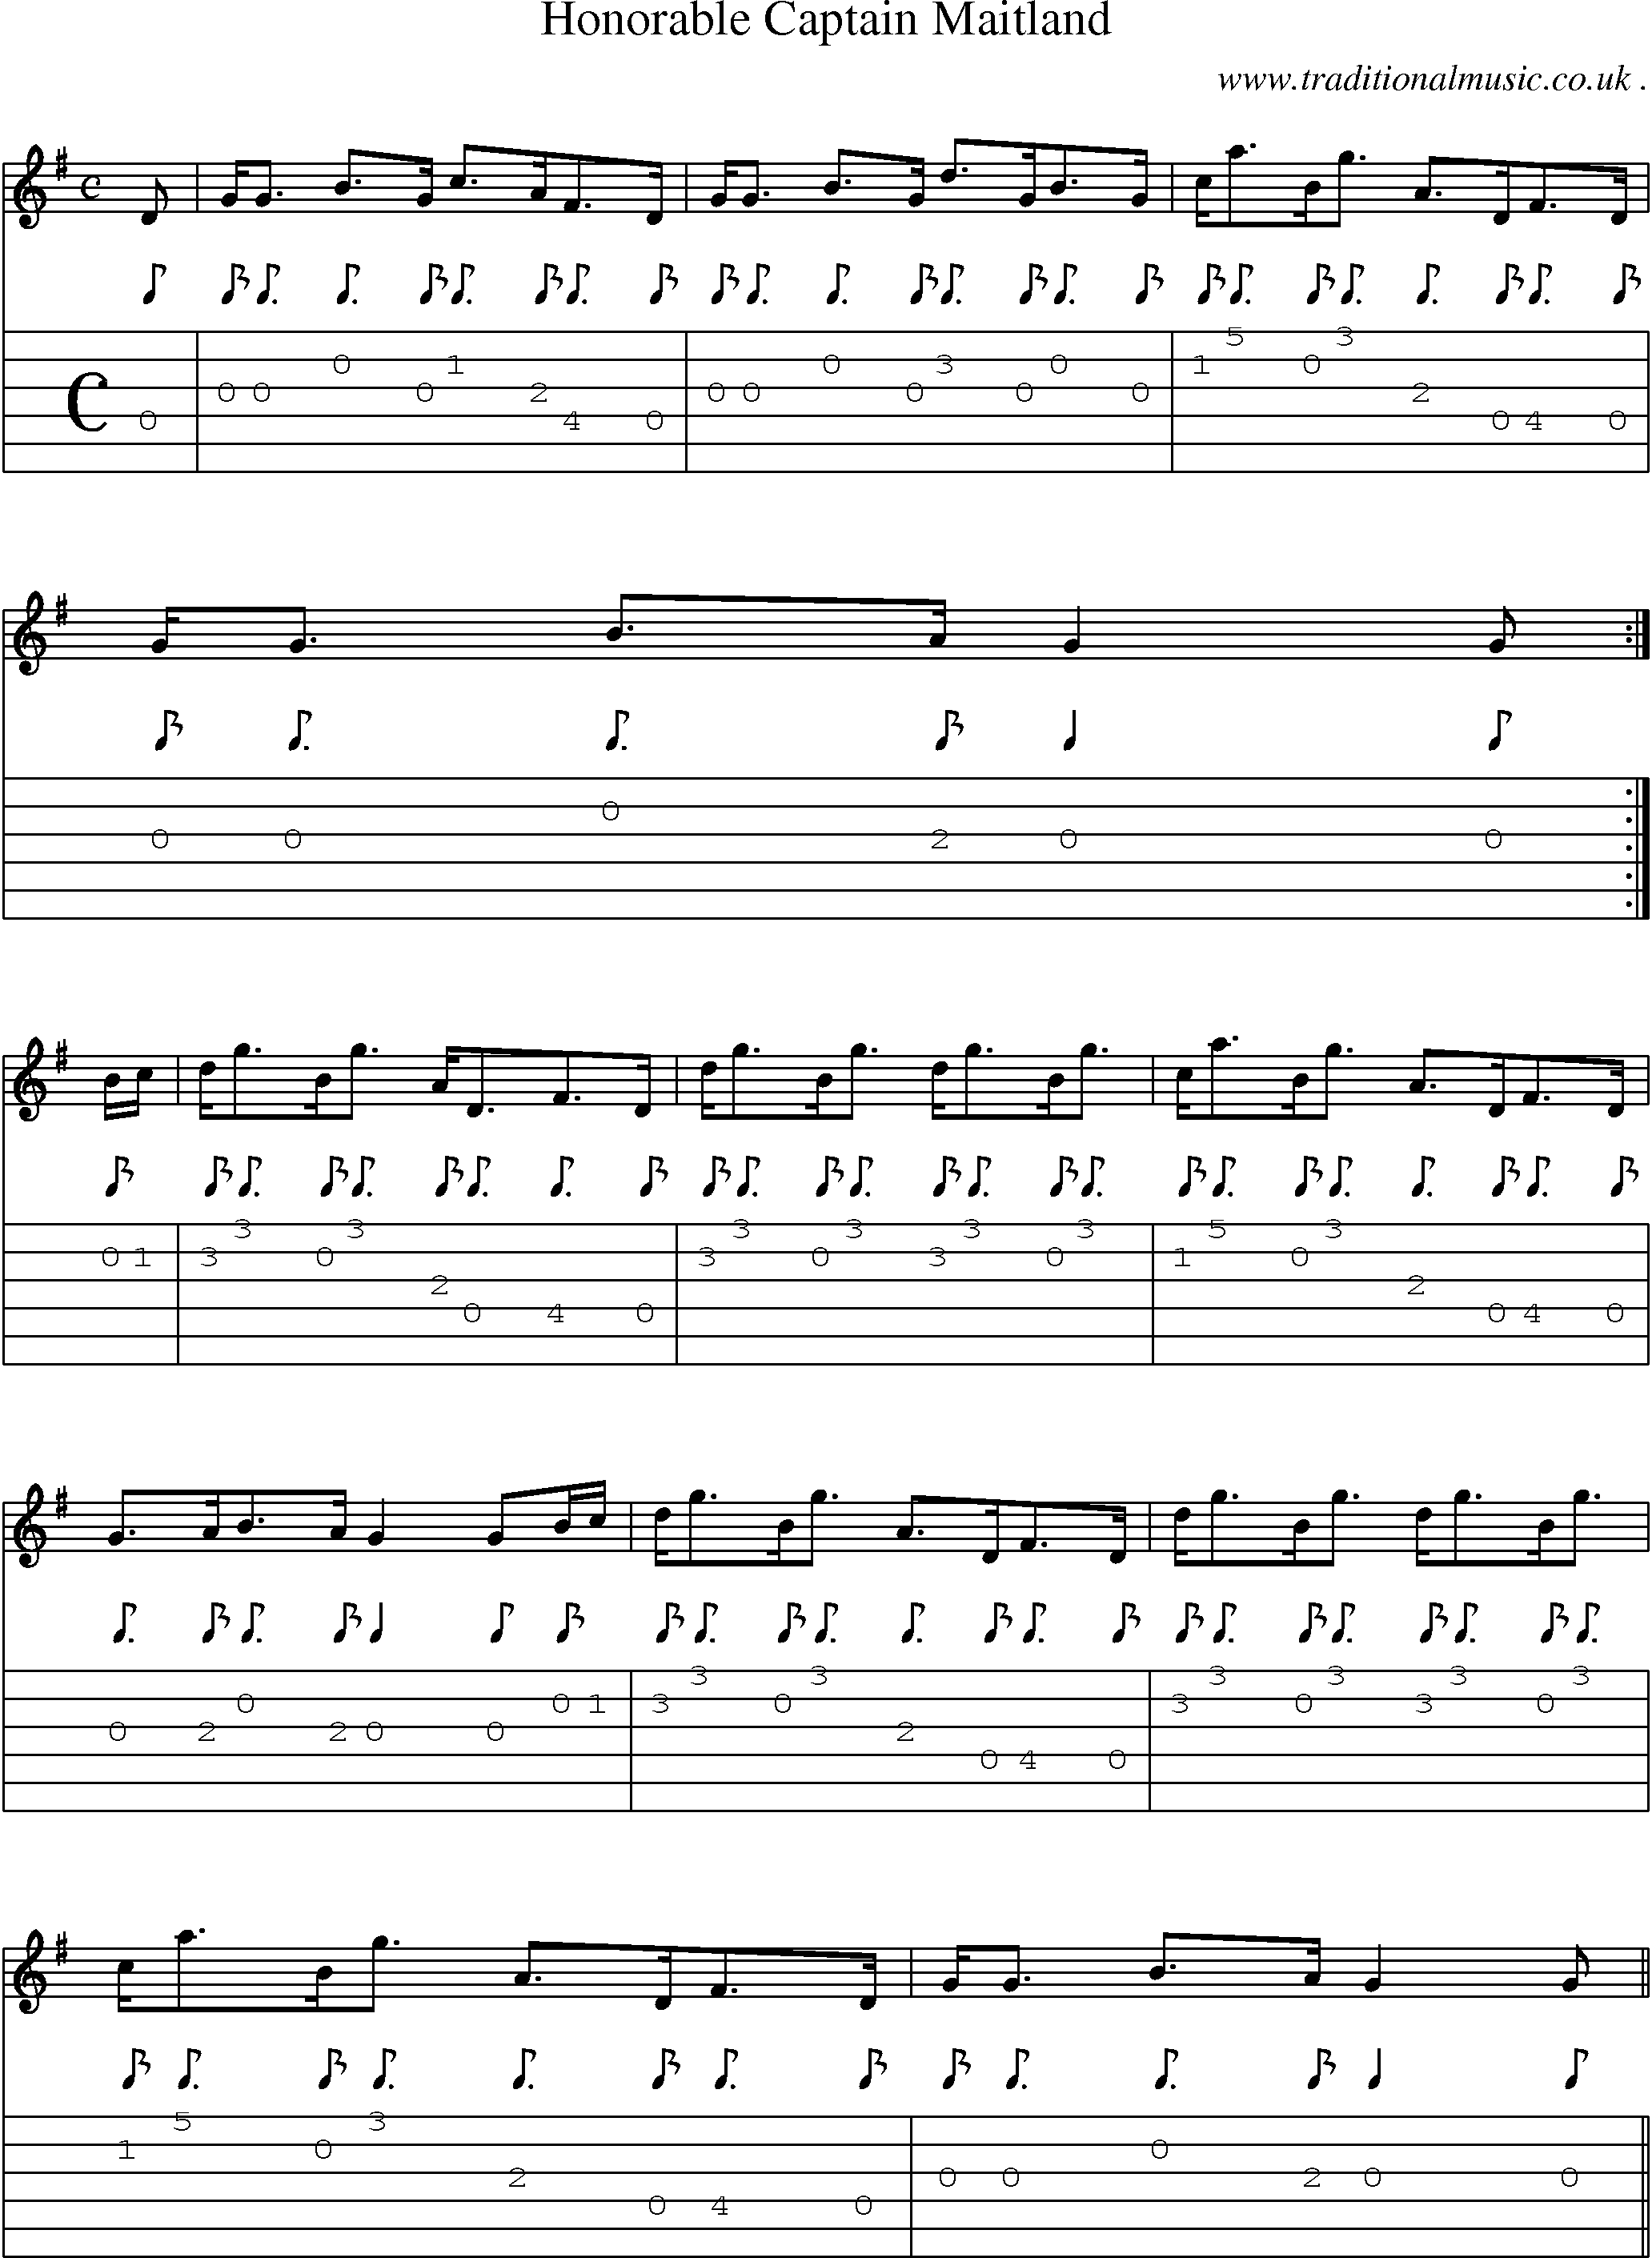 Sheet-music  score, Chords and Guitar Tabs for Honorable Captain Maitland